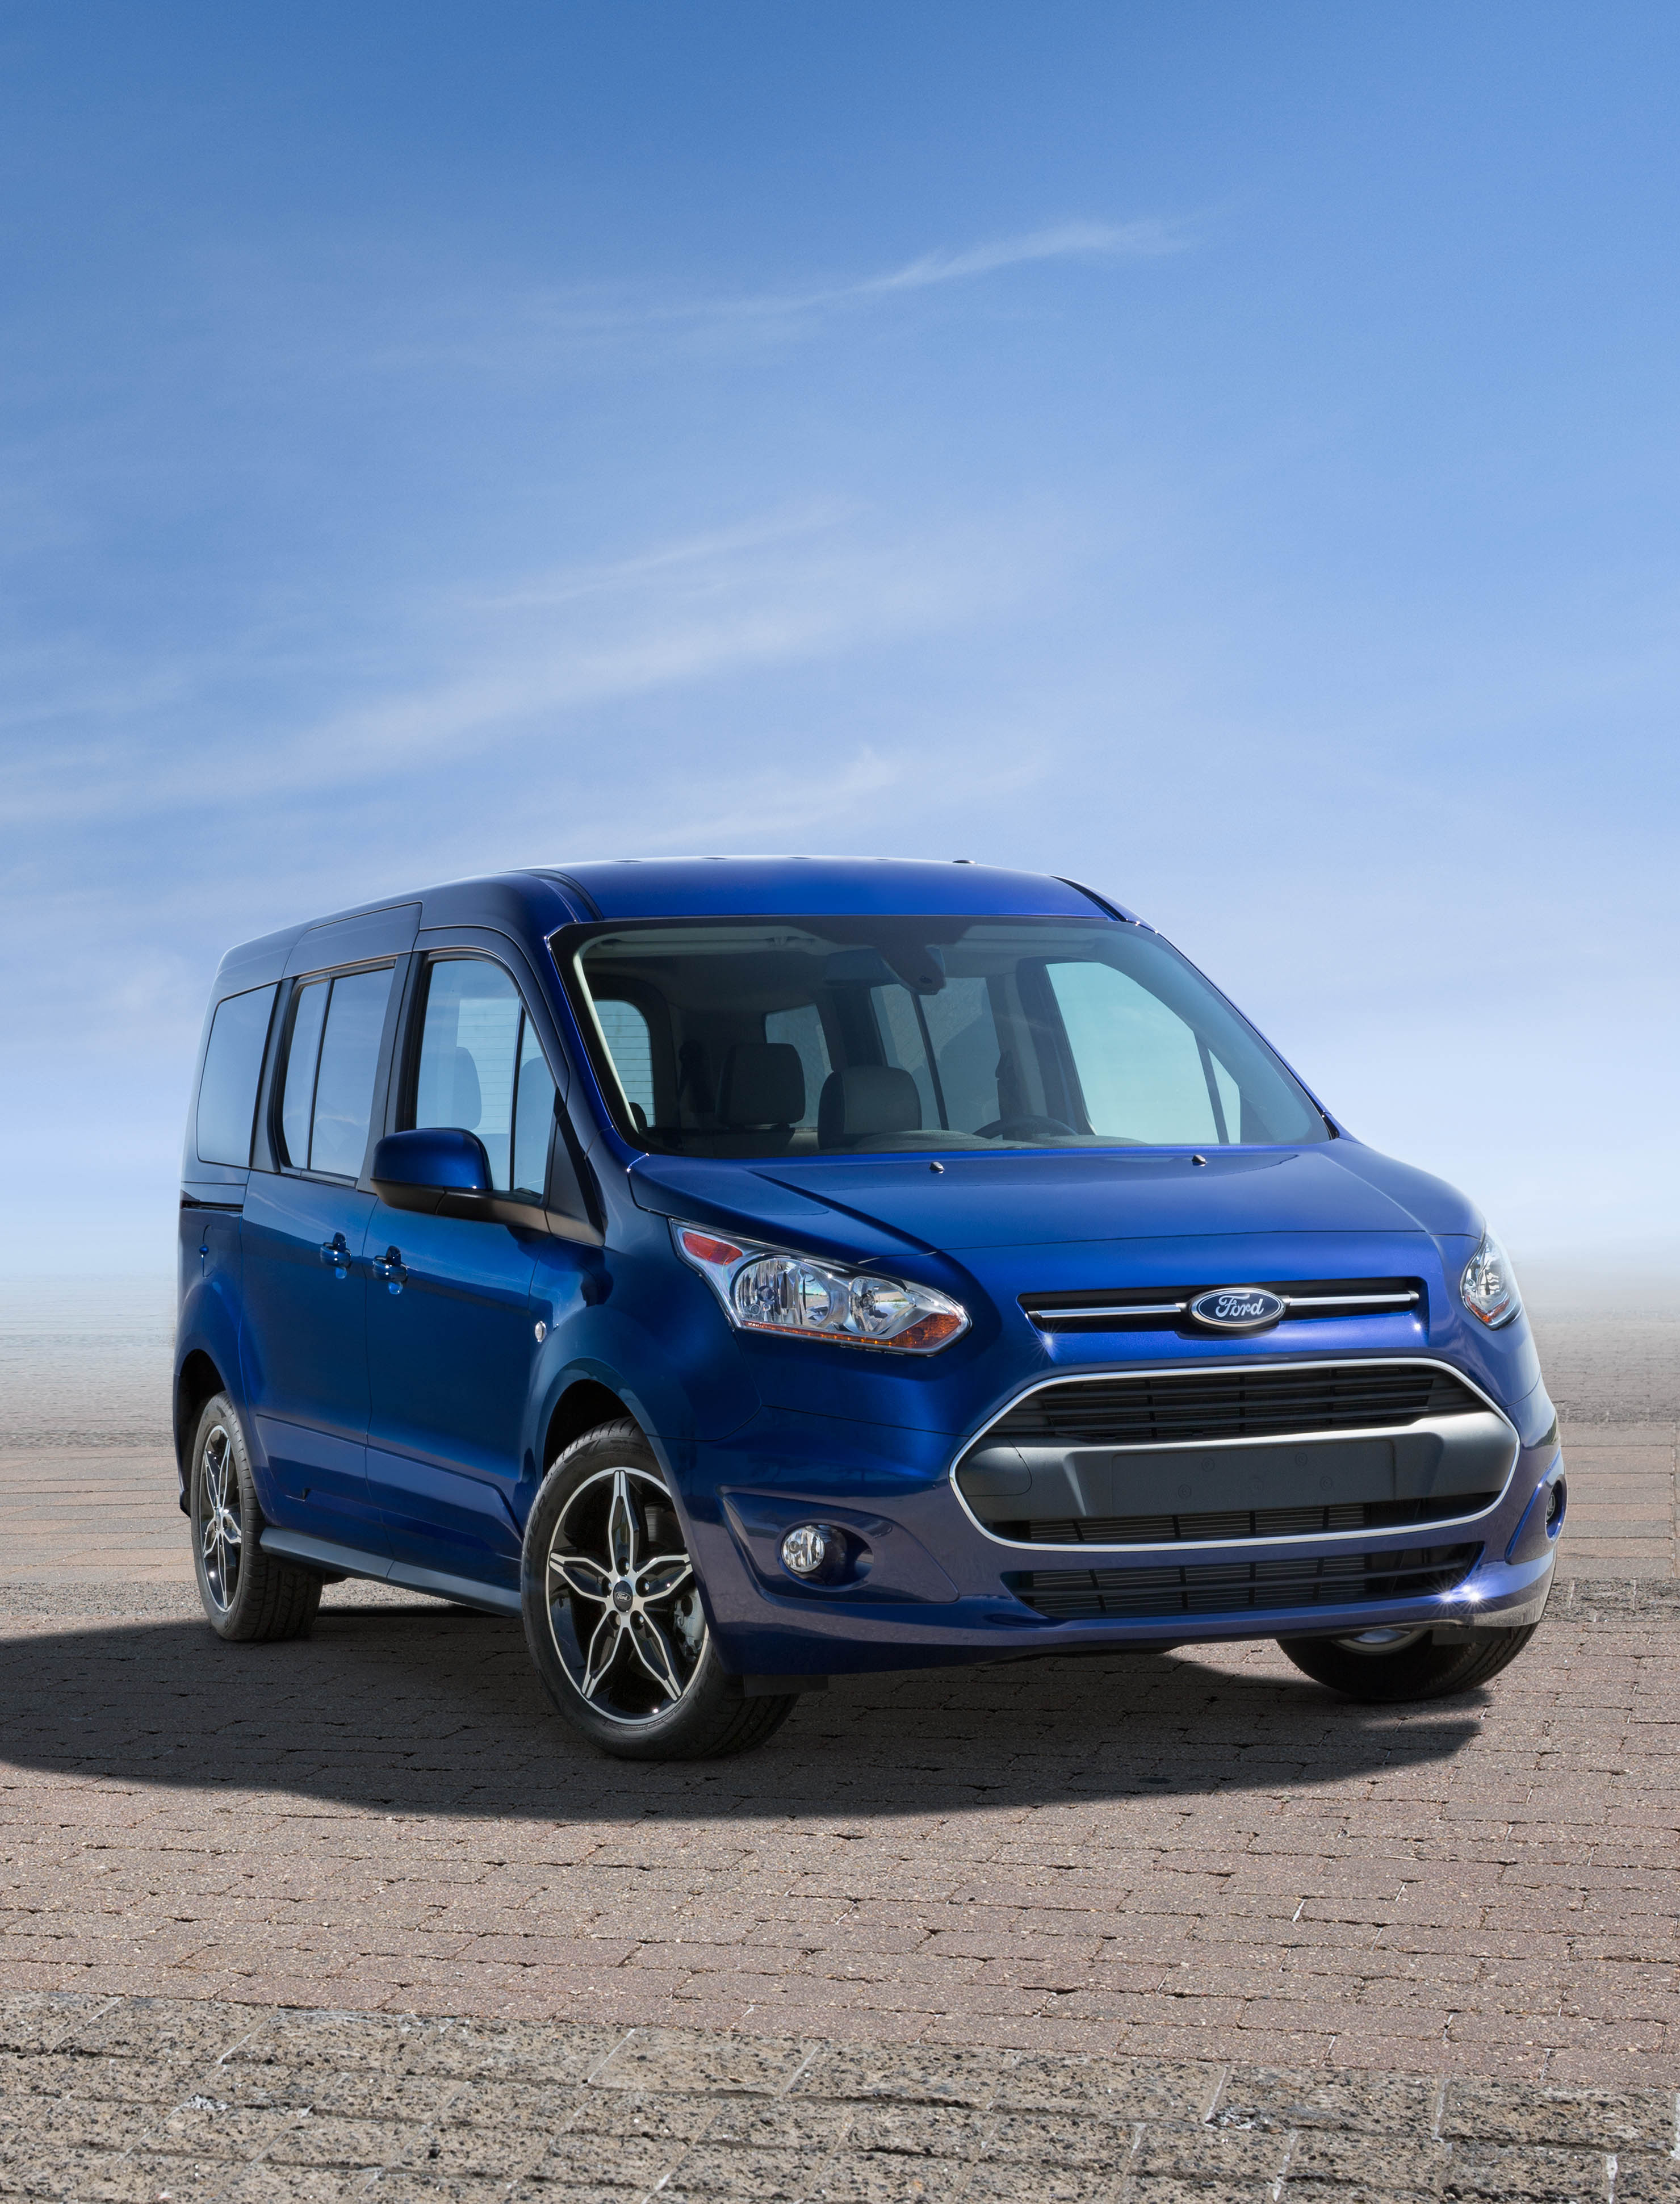 Transit Connect technology and trim updates: SYNC® 3 communications and entertainment system is newly available for 2017 Ford Transit Connect cargo van and Transit Connect Wagon. Transit Connect Wagon will be available in two new premium packages for Titanium and XLT trim levels.